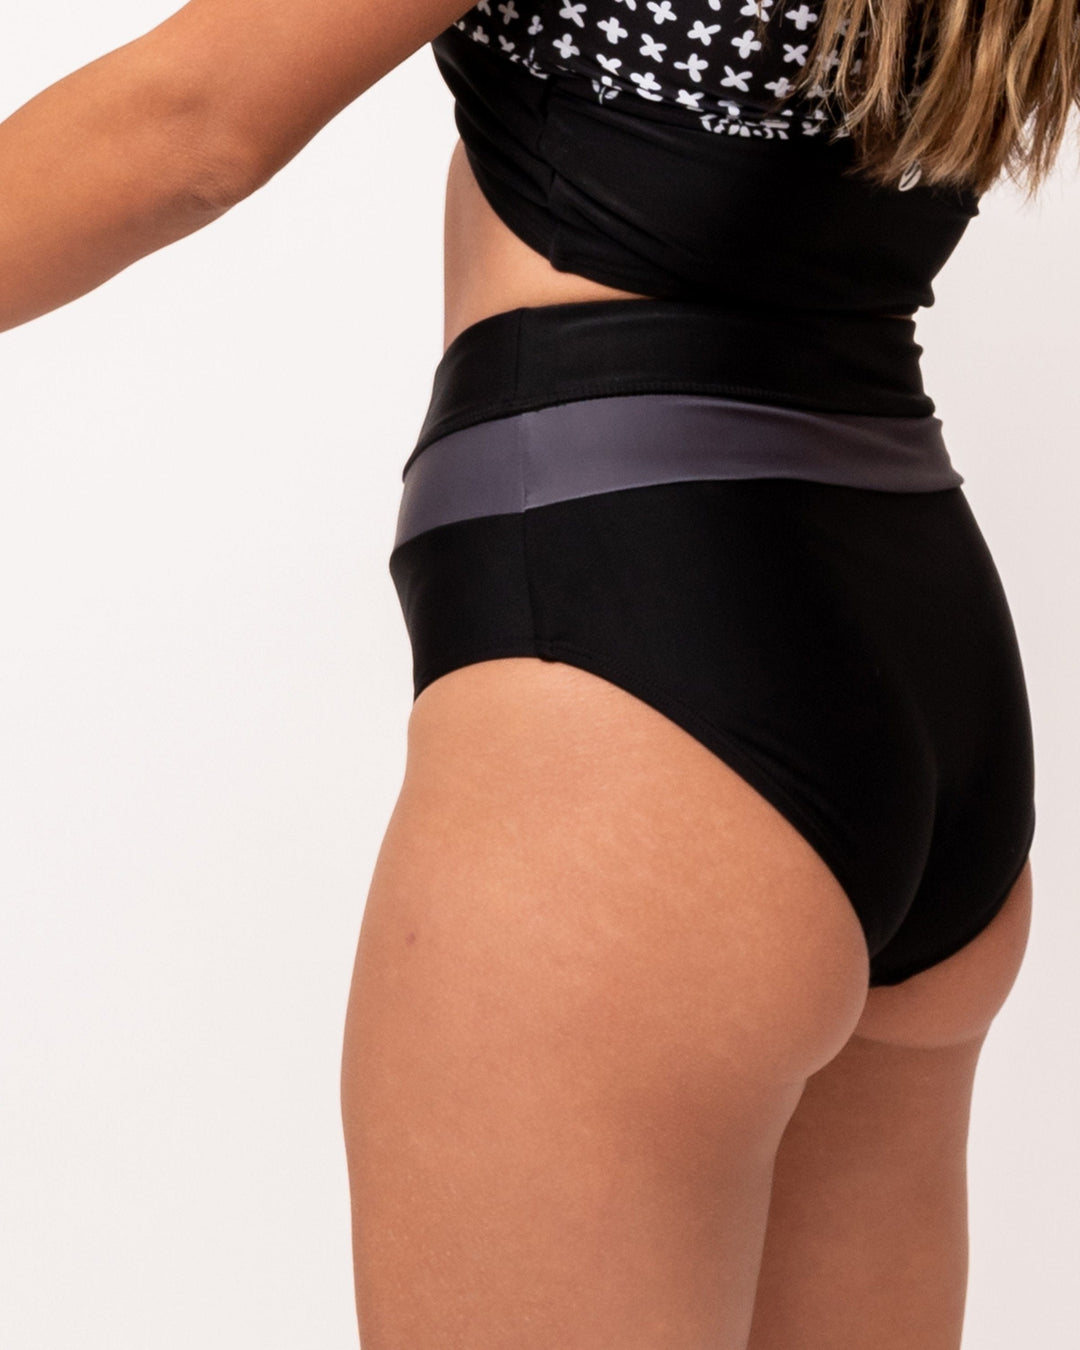 A studio image of a women wearing black and grey color blocked swimsuit bottoms.